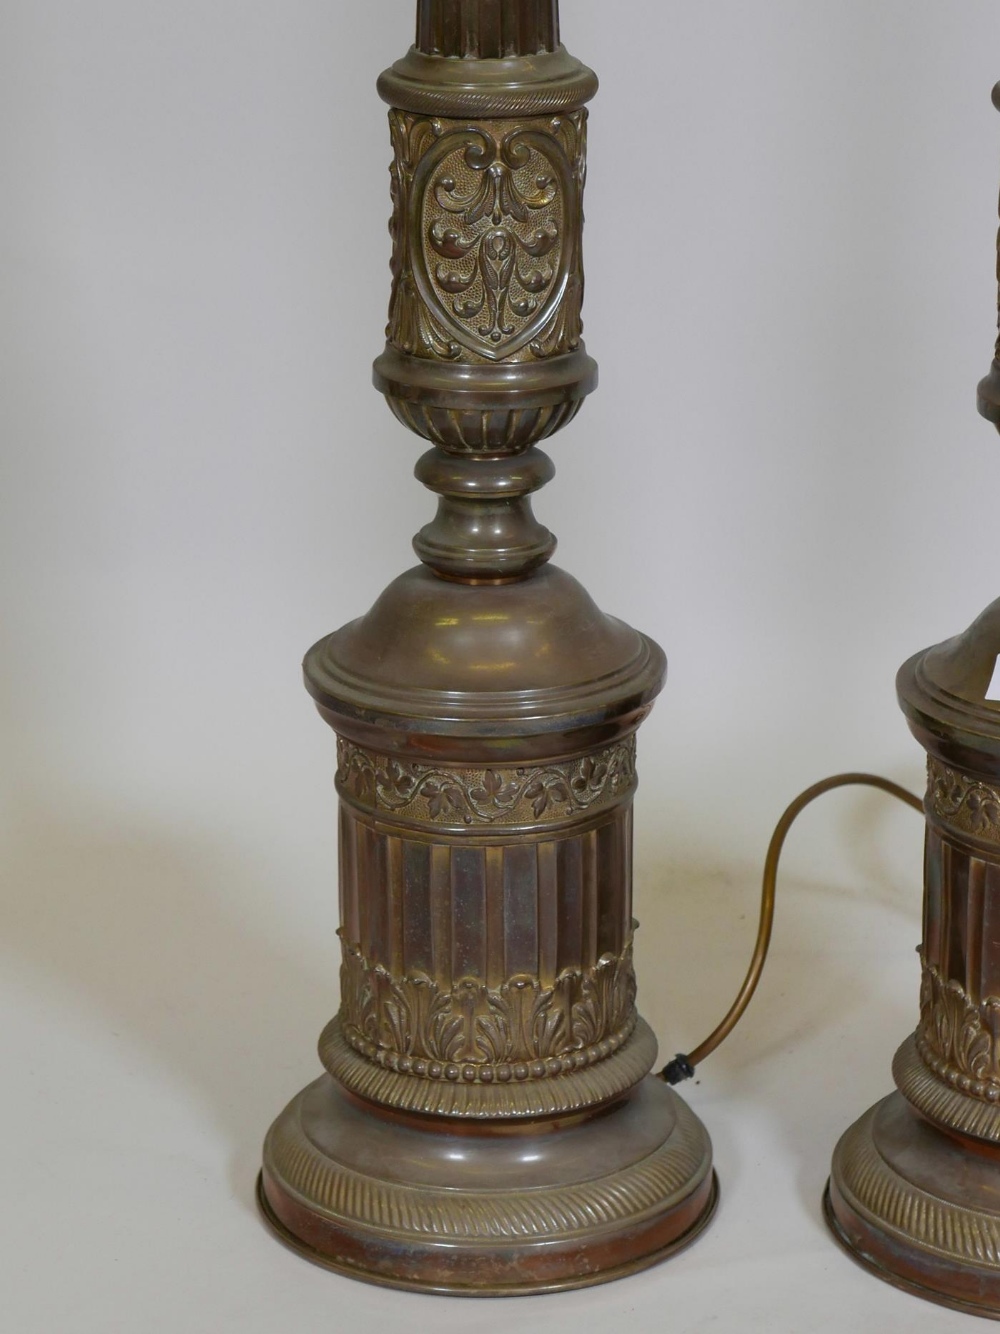 A pair of brass table lamps with repoussé classical decoration, 34" high - Image 2 of 2